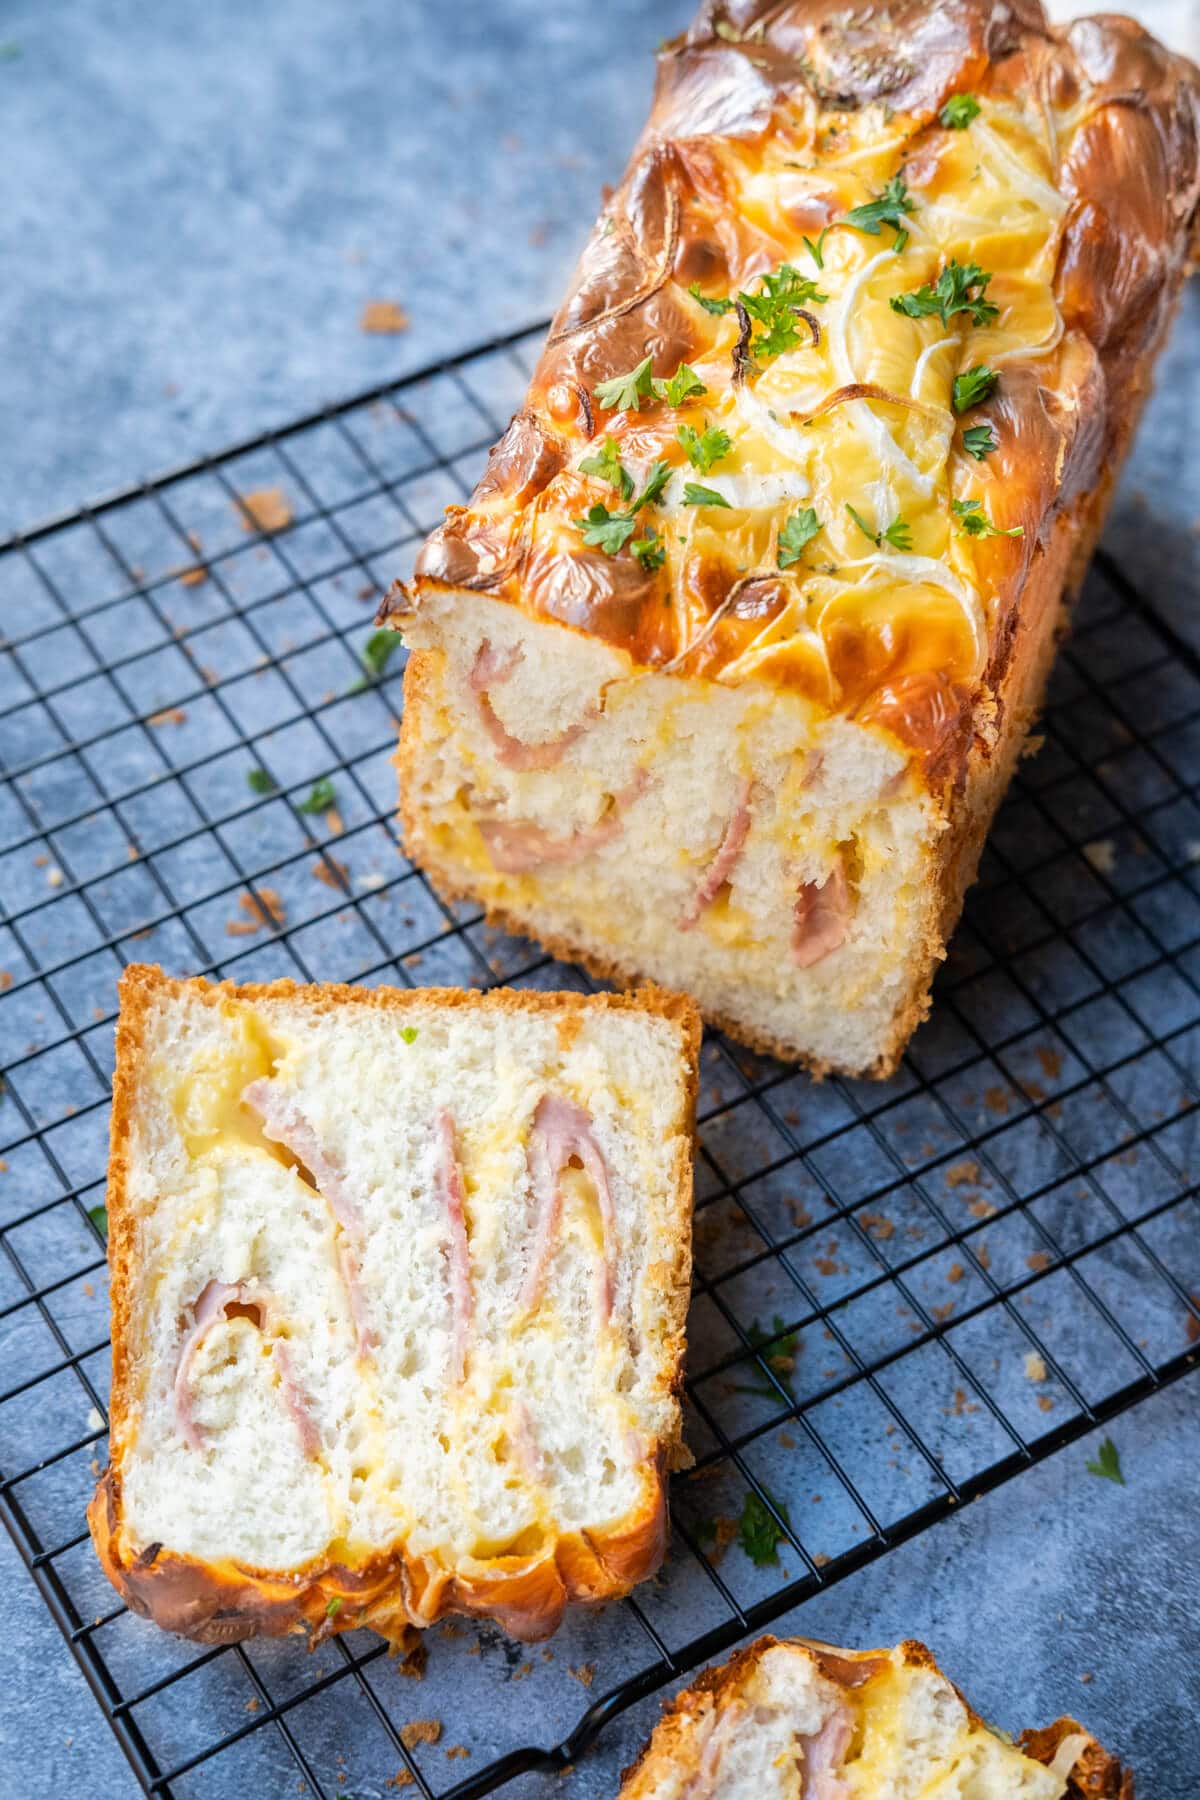 A loaf of bread with golden-brown crust and a savory filling of ham and melted cheese in between with one slice of it cut out.